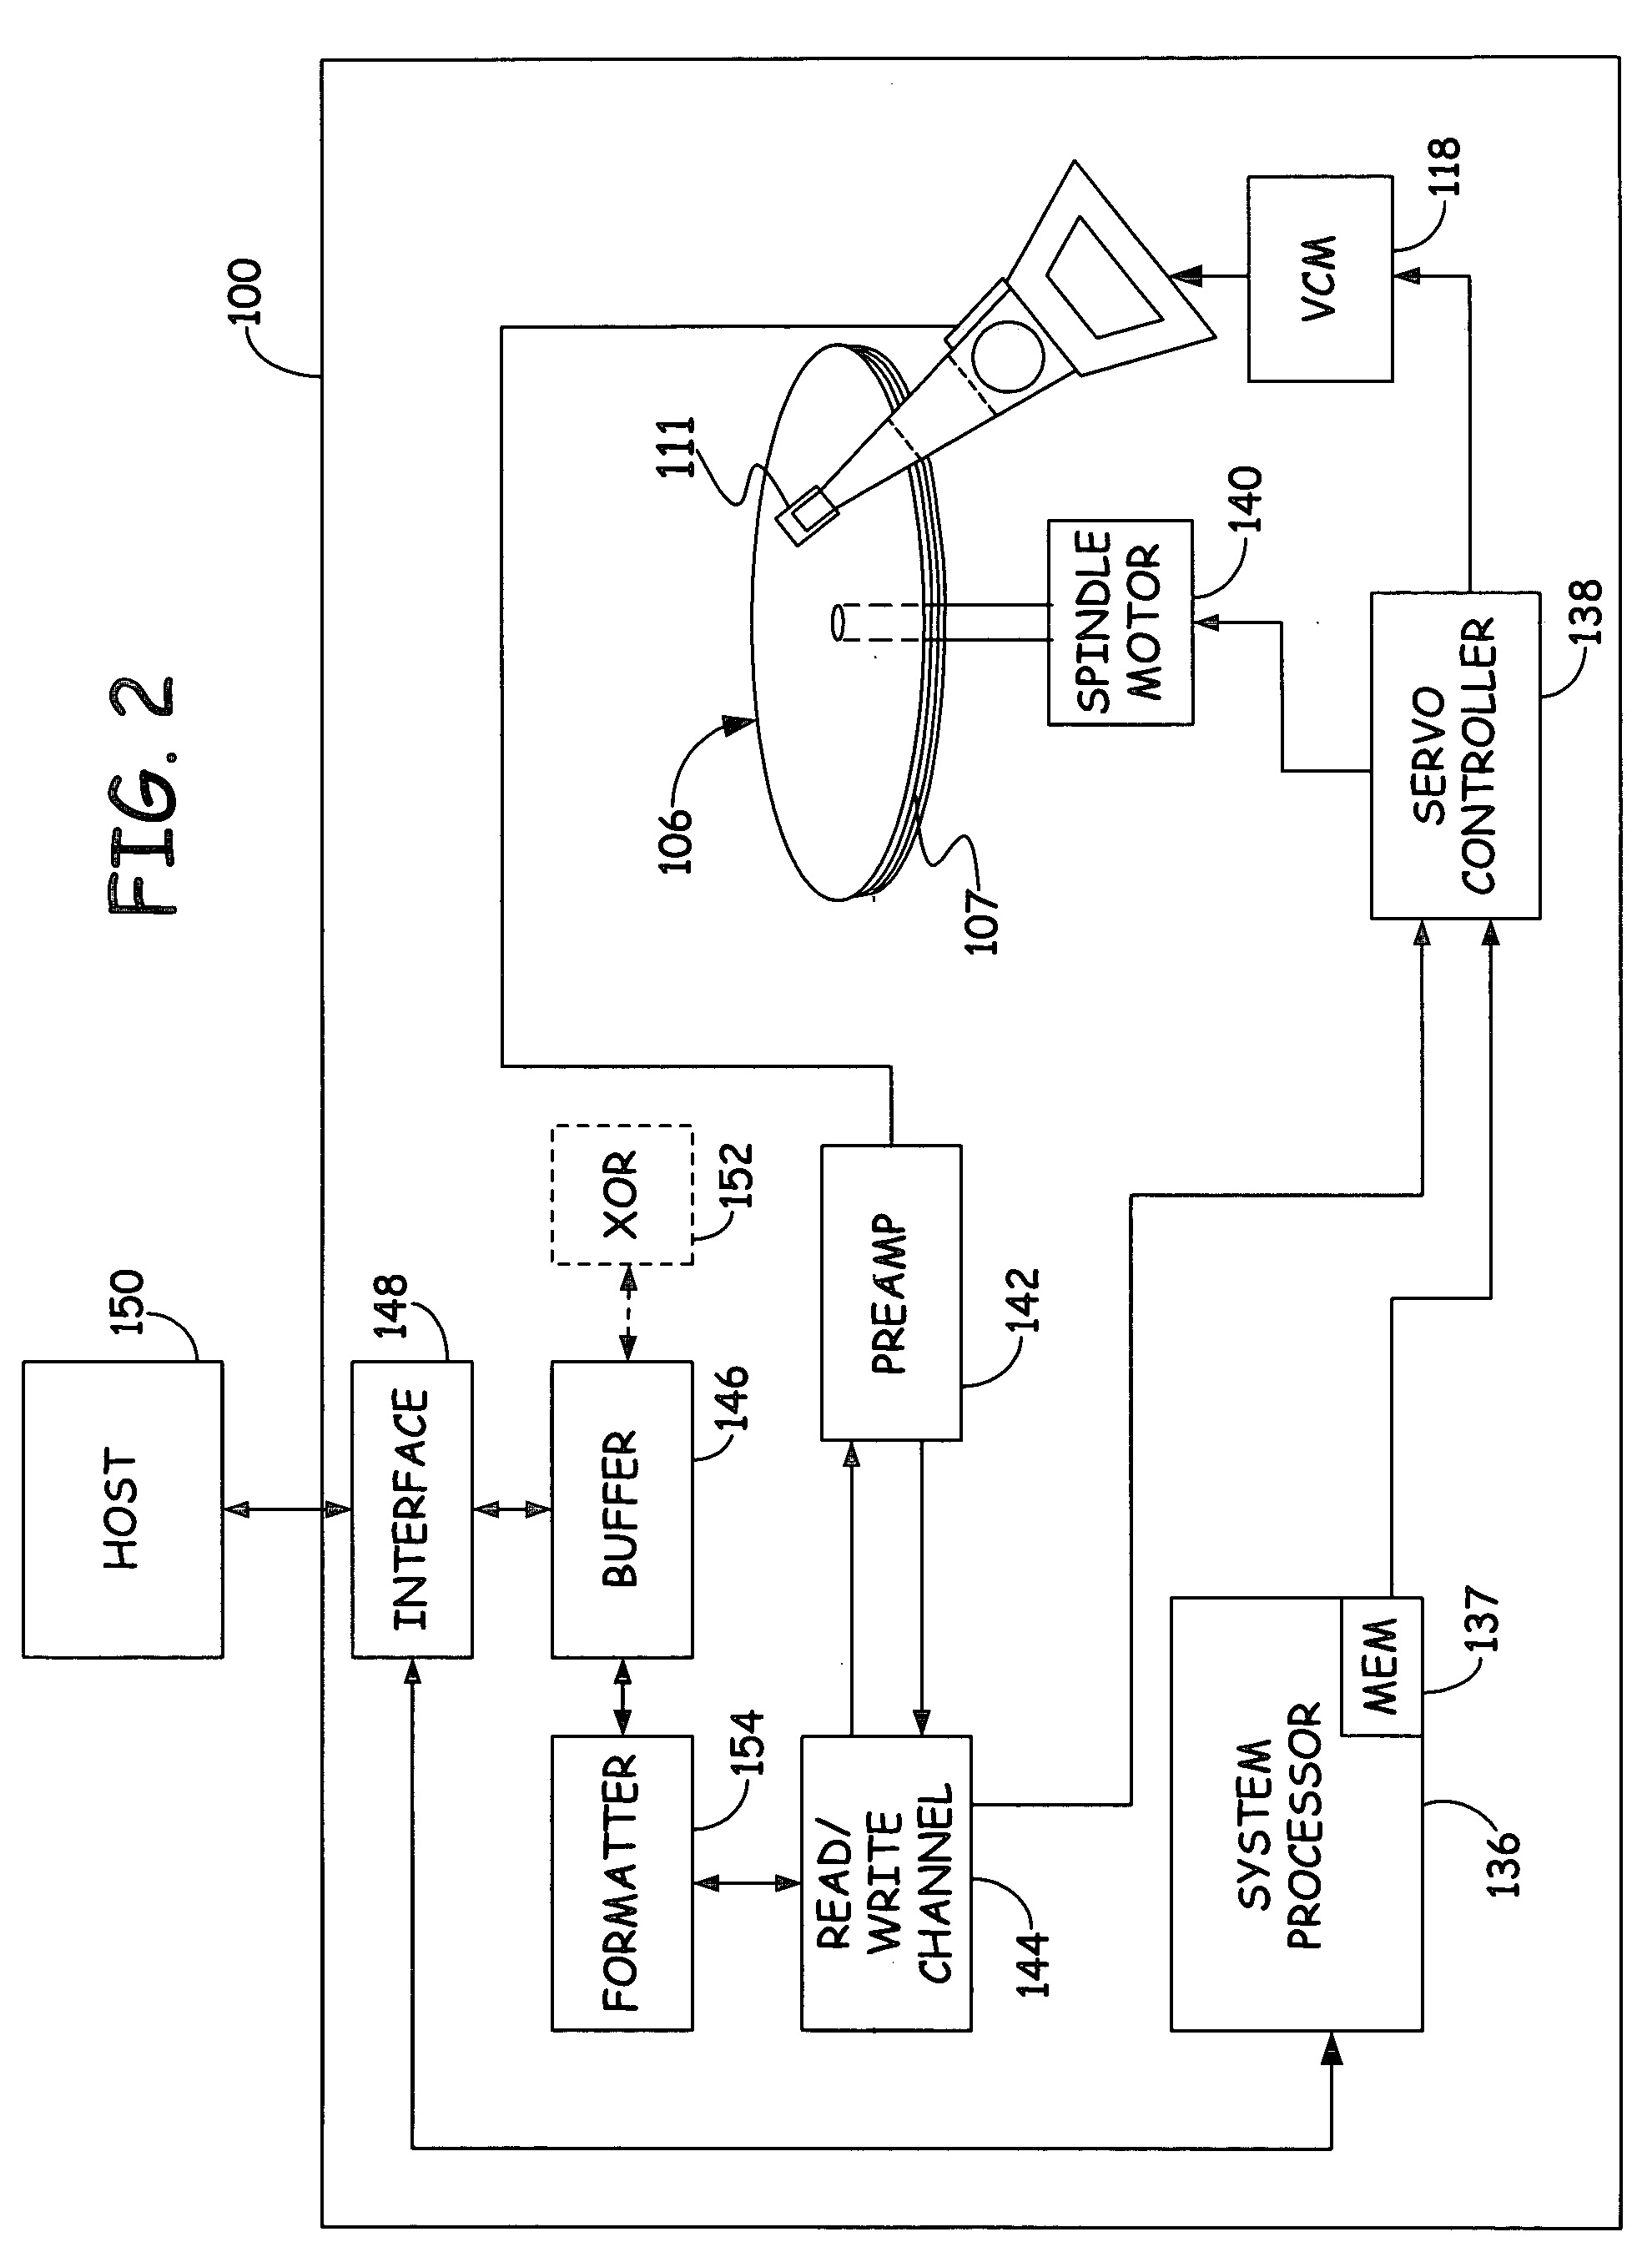 Method and system for increasing data storage reliability and efficiency via compression